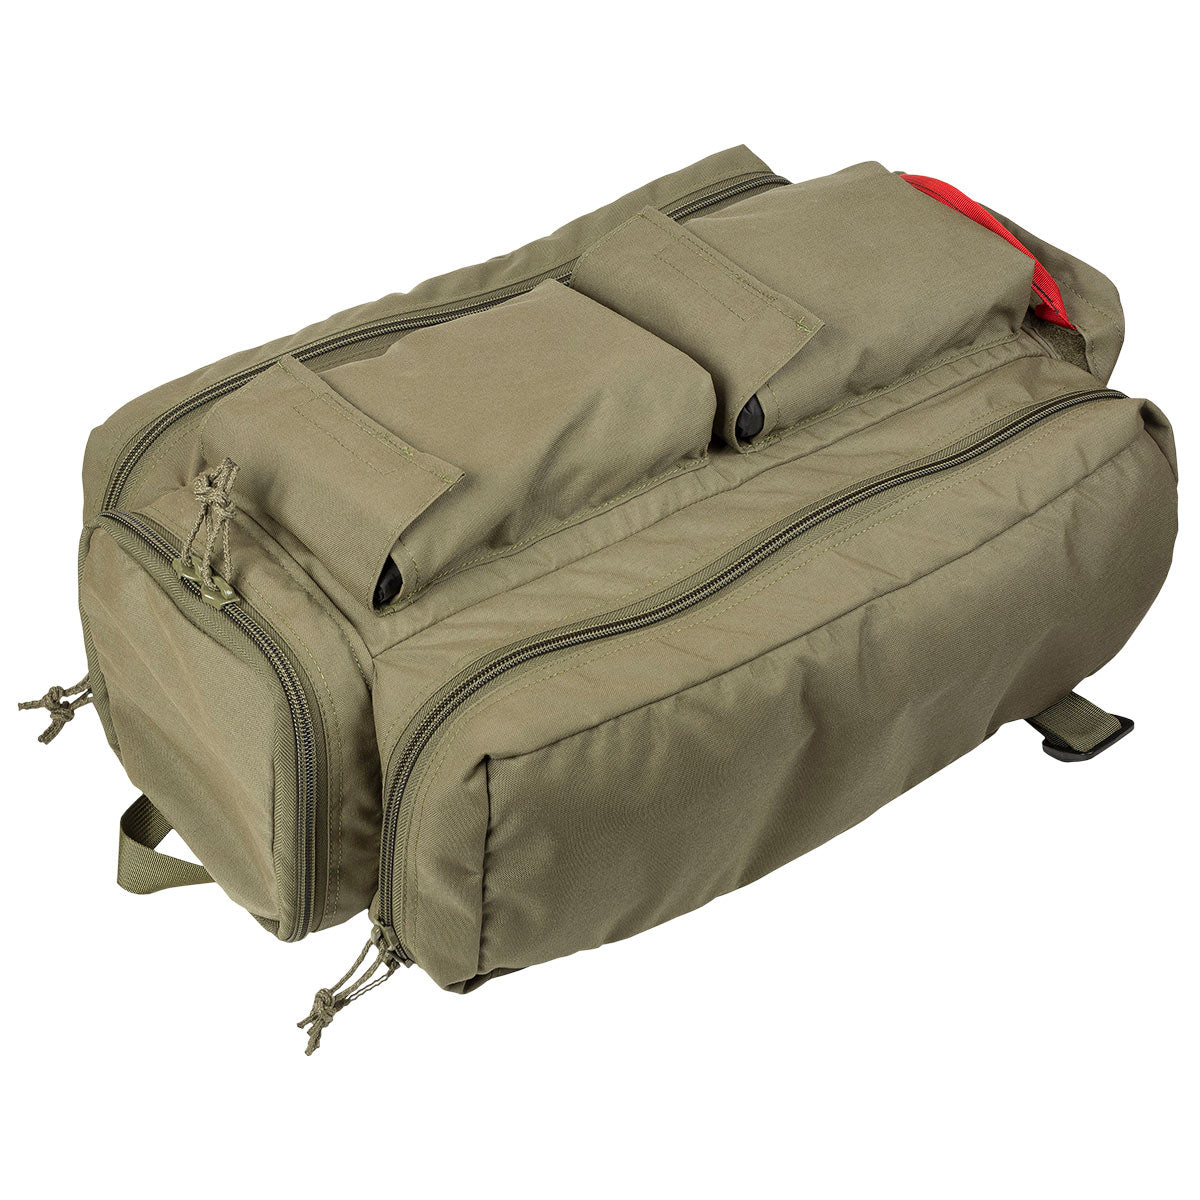 TacMed™ Warm Zone/SRO ARK - Bag Only